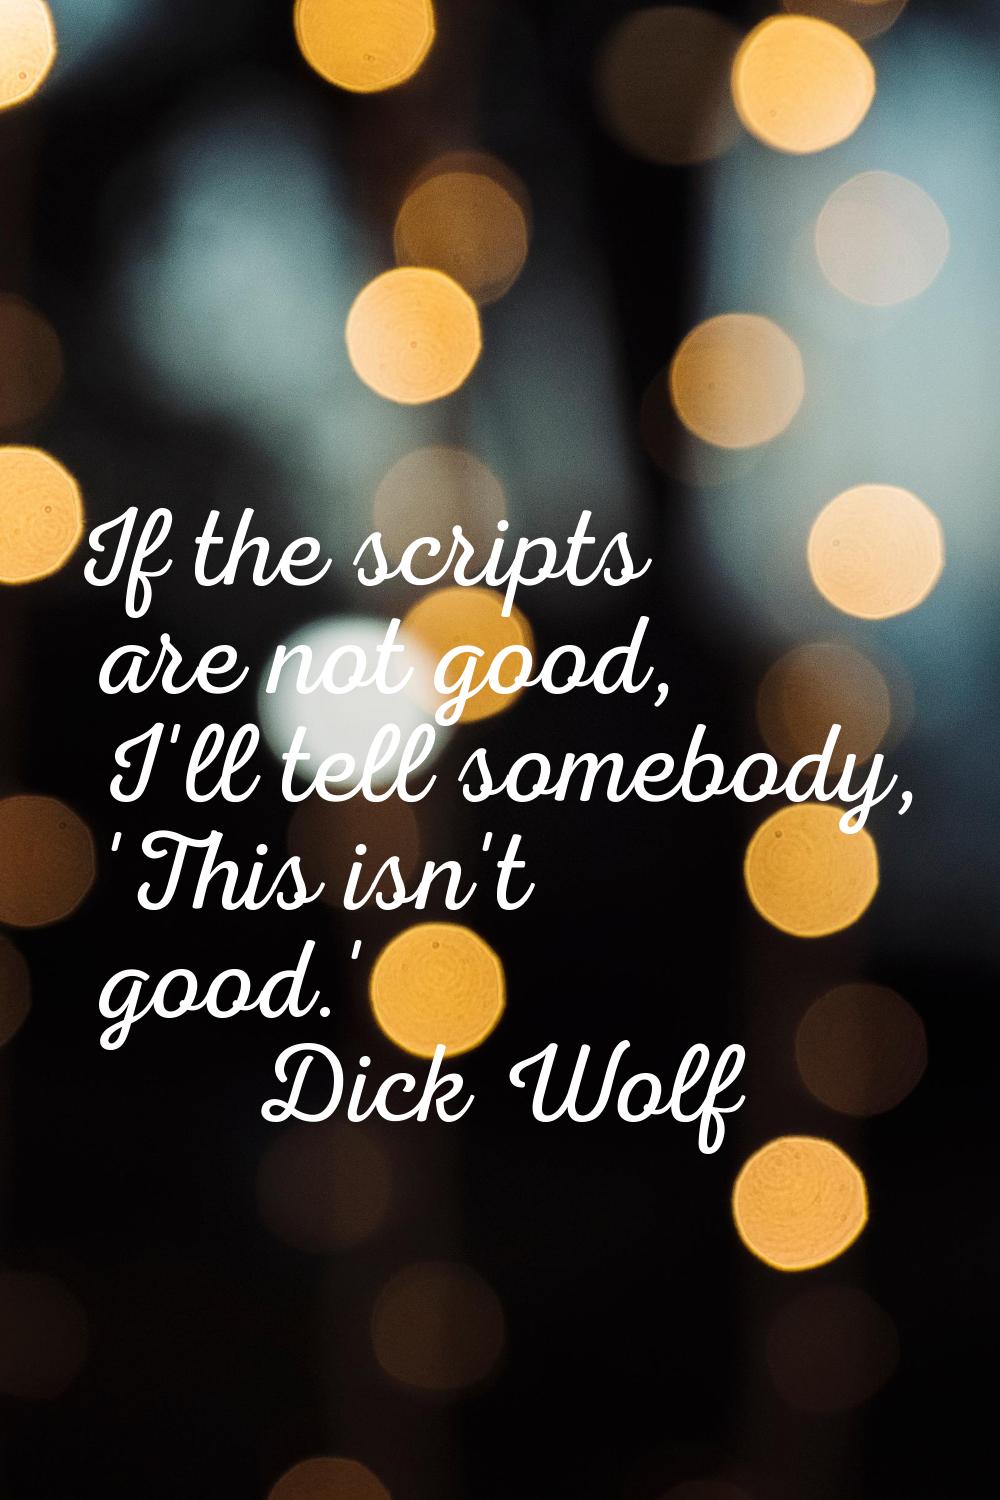 If the scripts are not good, I'll tell somebody, 'This isn't good.'